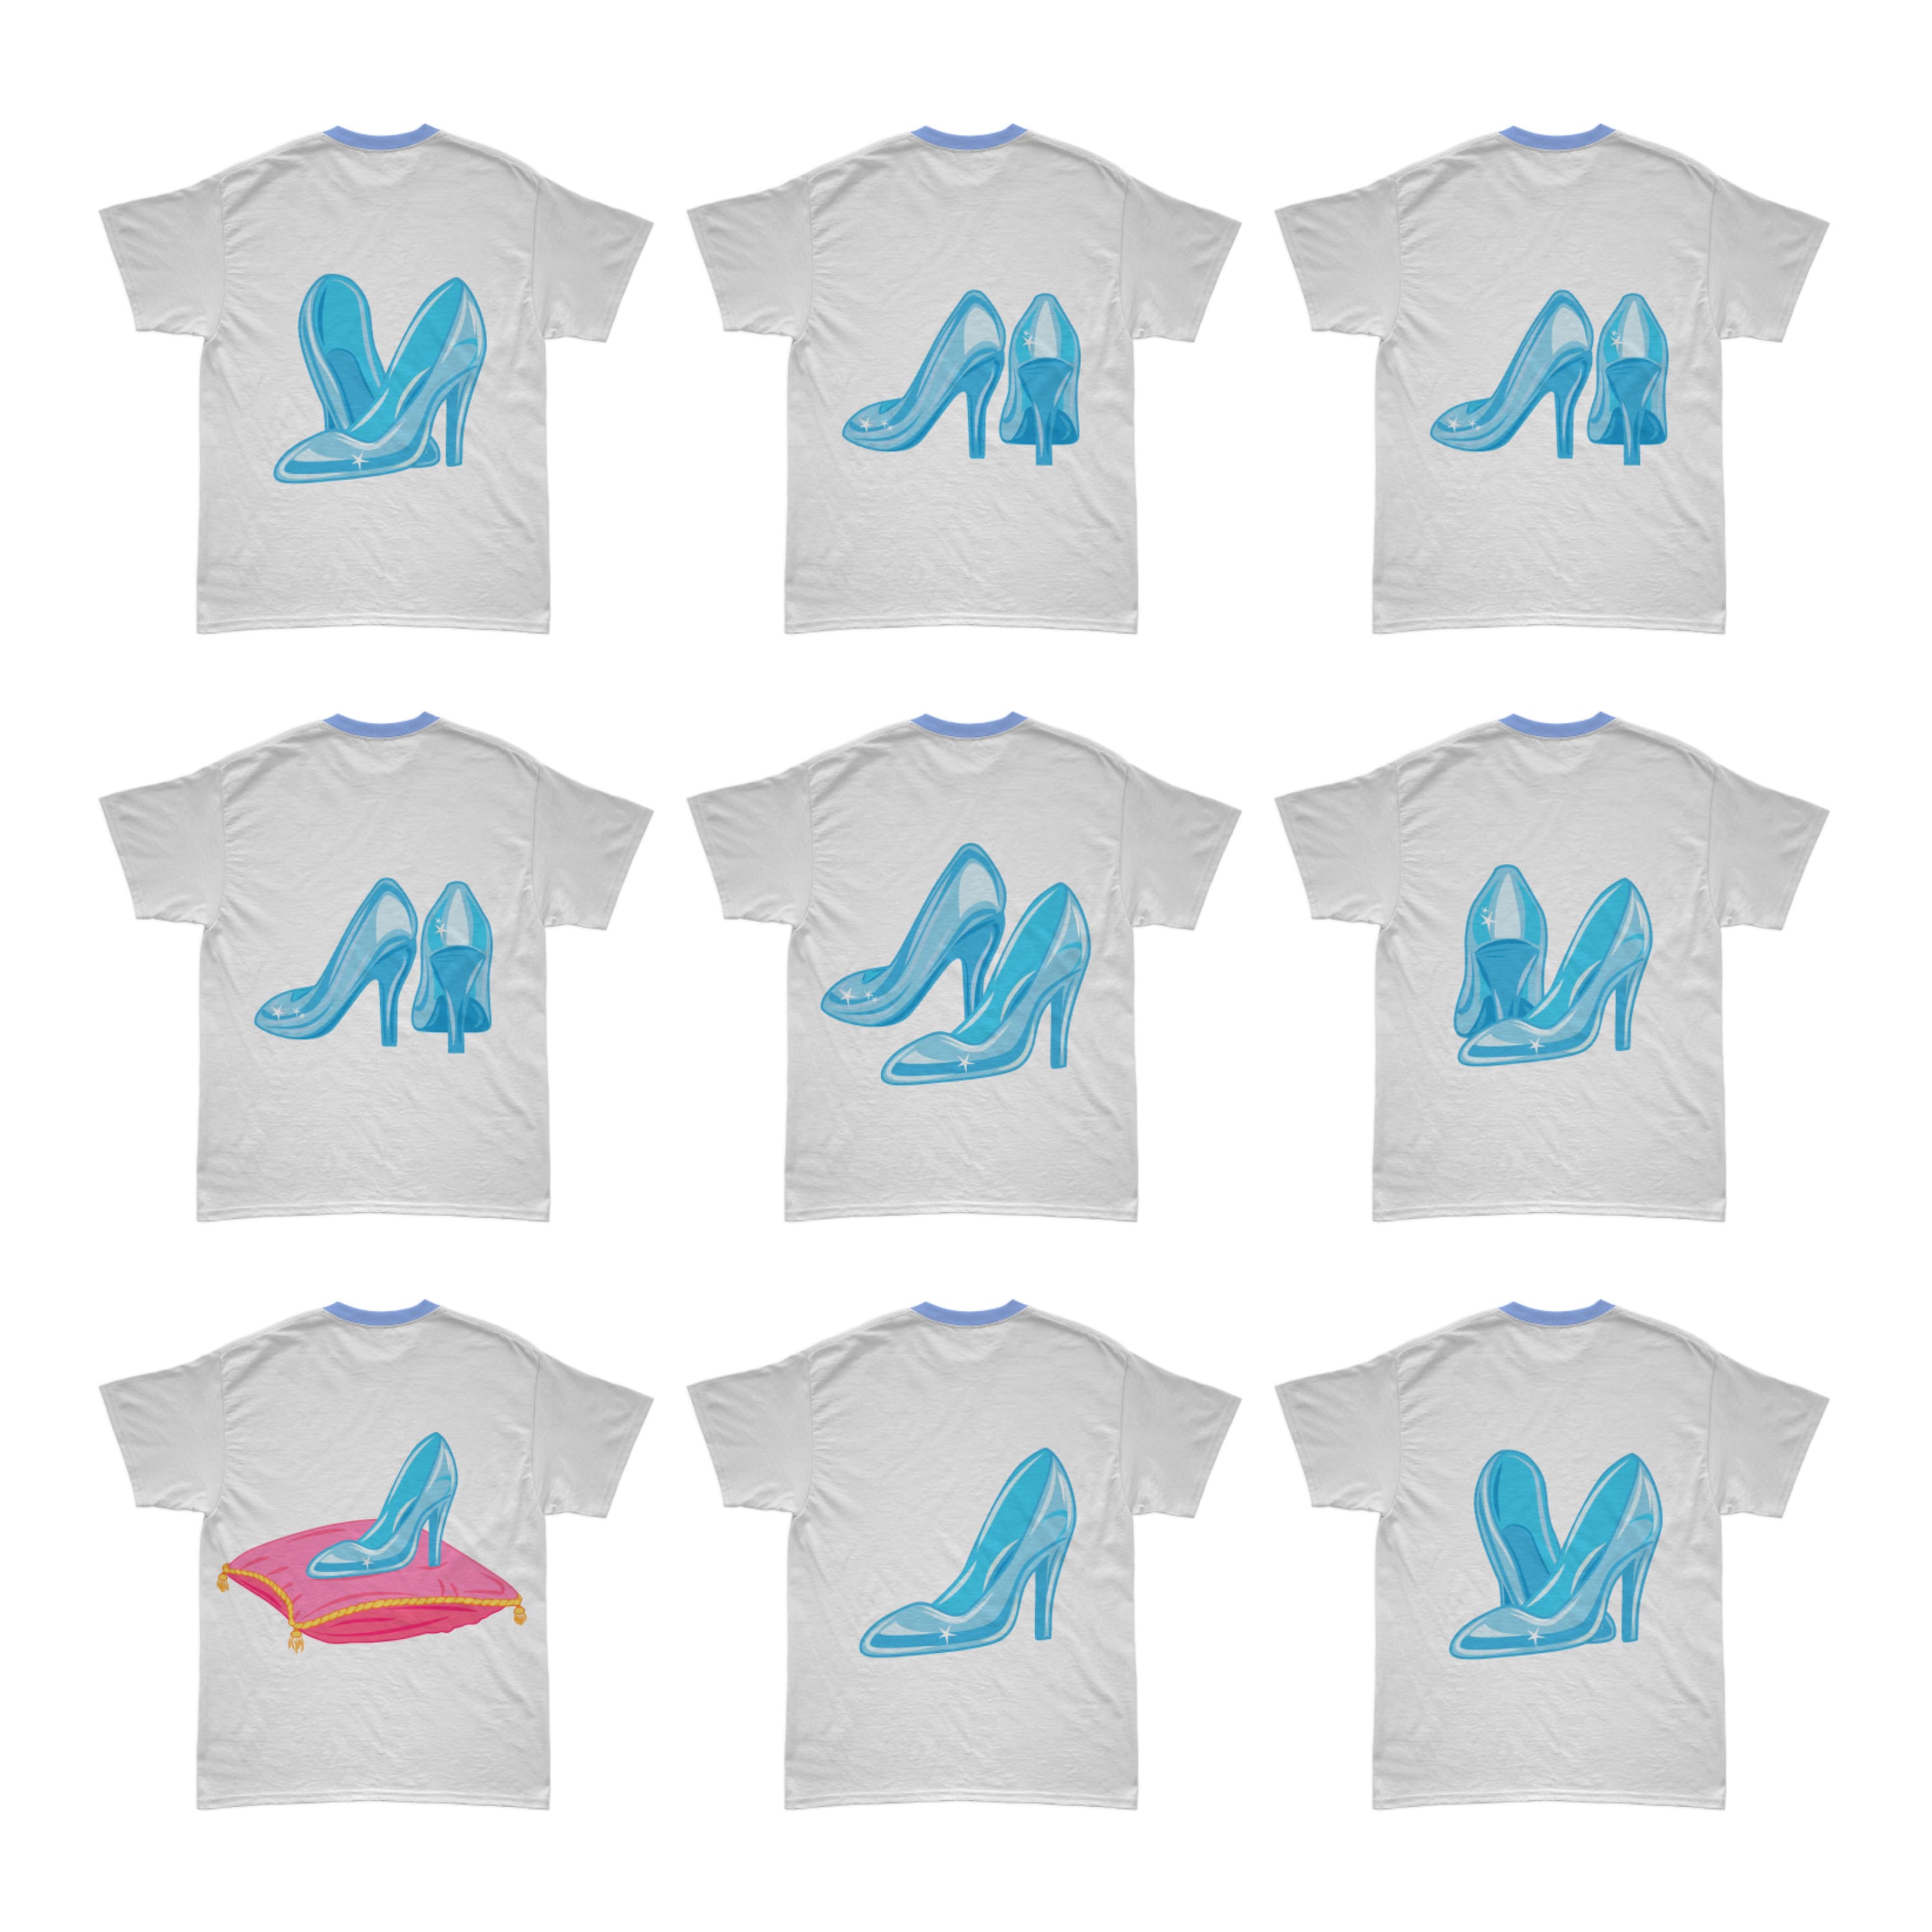 Bundle of white T-shirts with a gorgeous print of Cinderella's blue shoes.